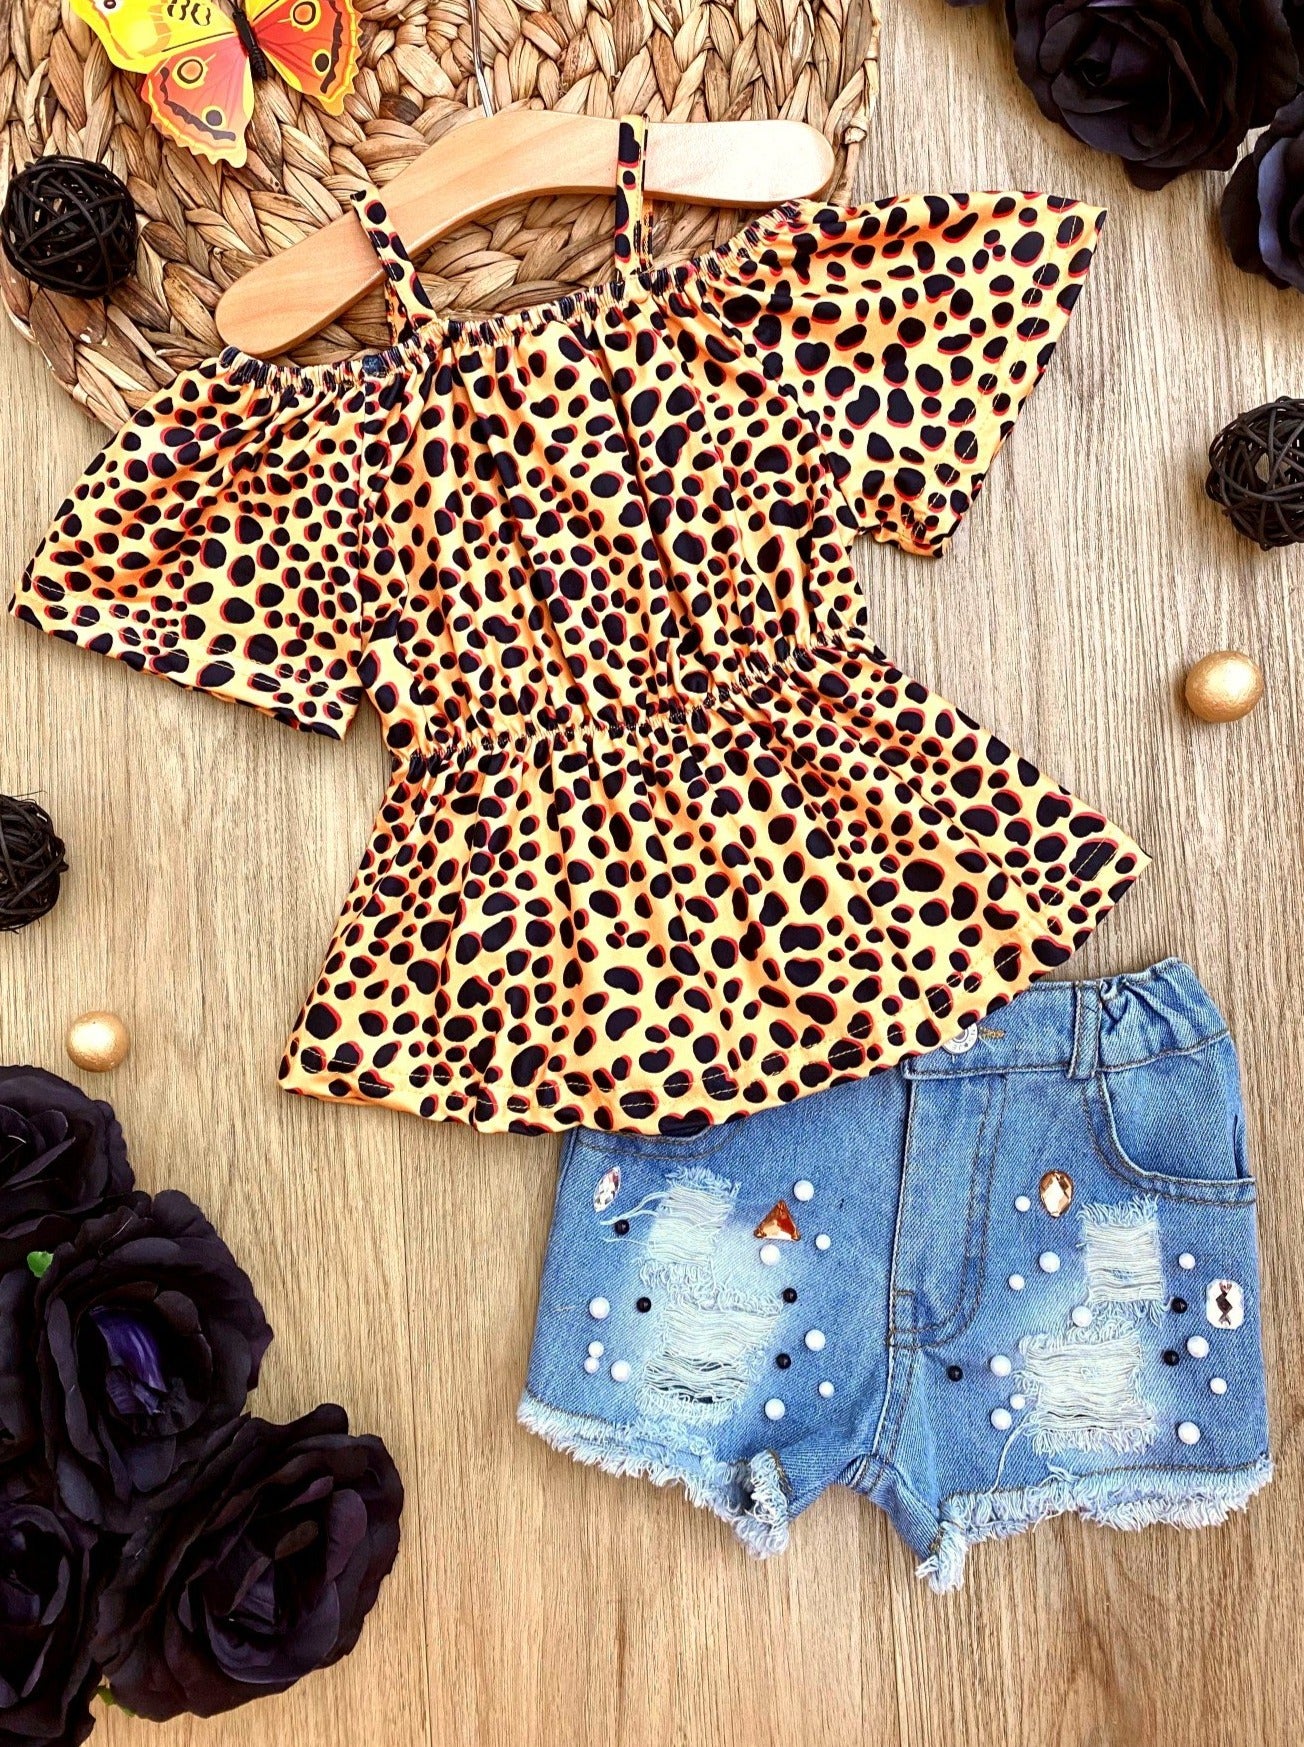 Girls Spring Outfits | Leopard Ruffle Top & Pearled Denim Shorts Set